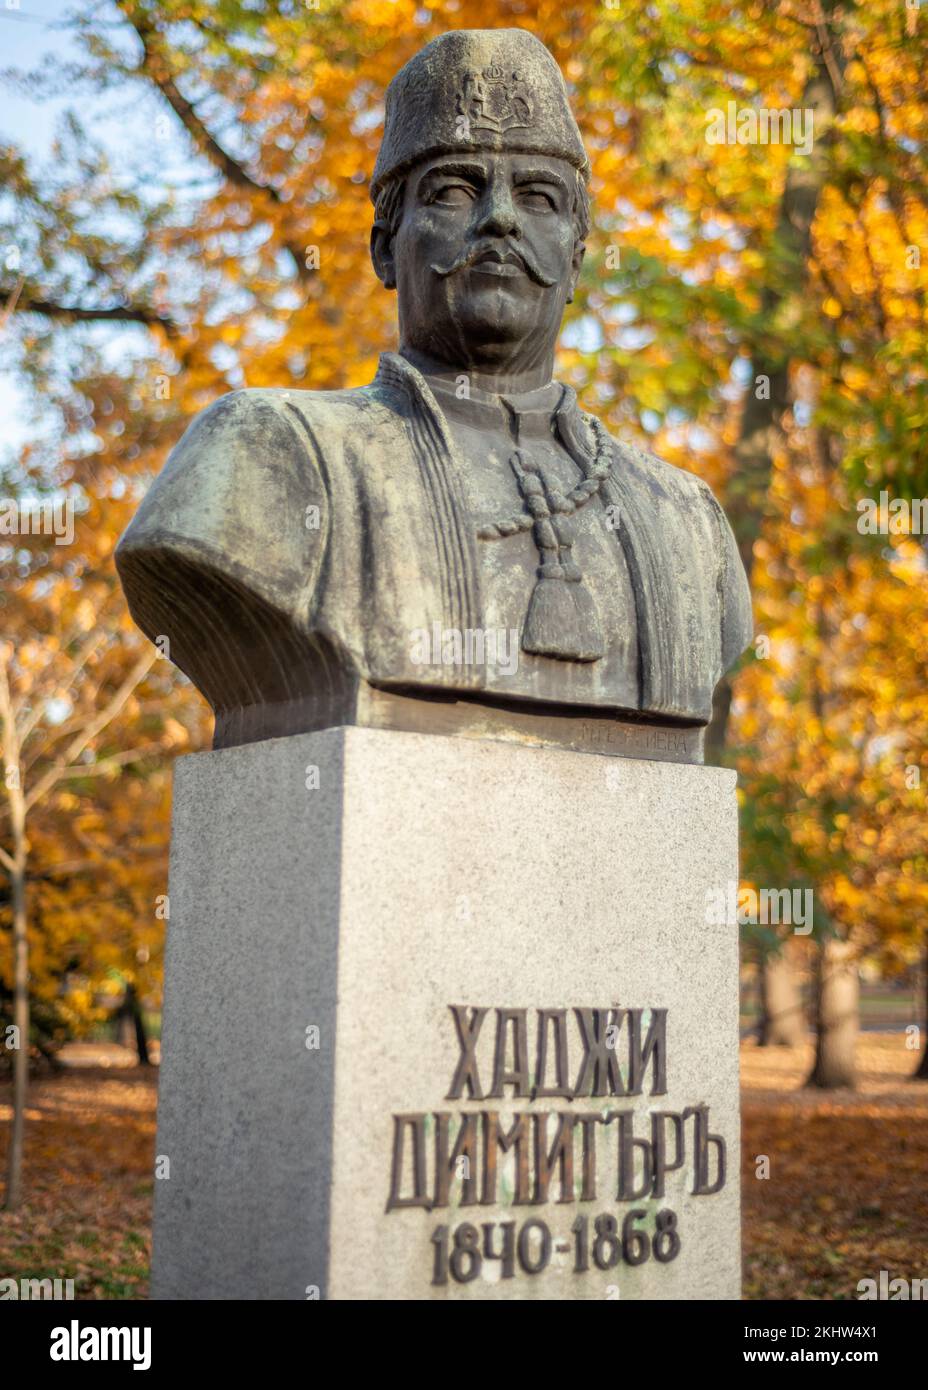 Bust of Hadzhi Dimitar as a prominent voivode hero and revolution leader. Sofia, Bulgaria Stock Photo